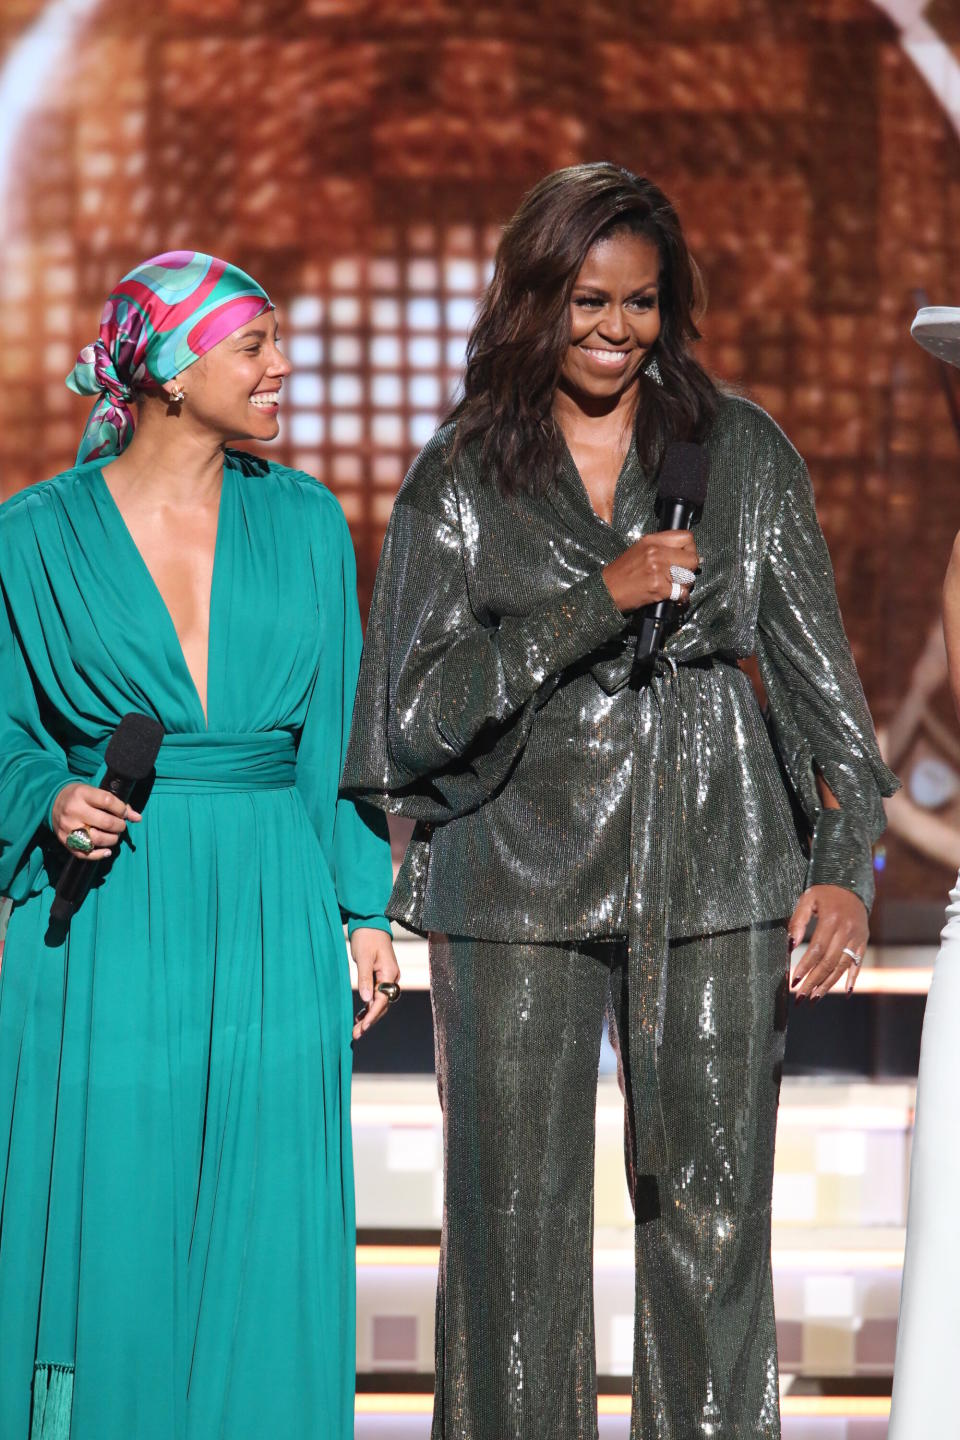 Michelle Obama and Alicia Keys at the 61st annual Grammy Awards in Los Angeles on Feb. 10.&nbsp;